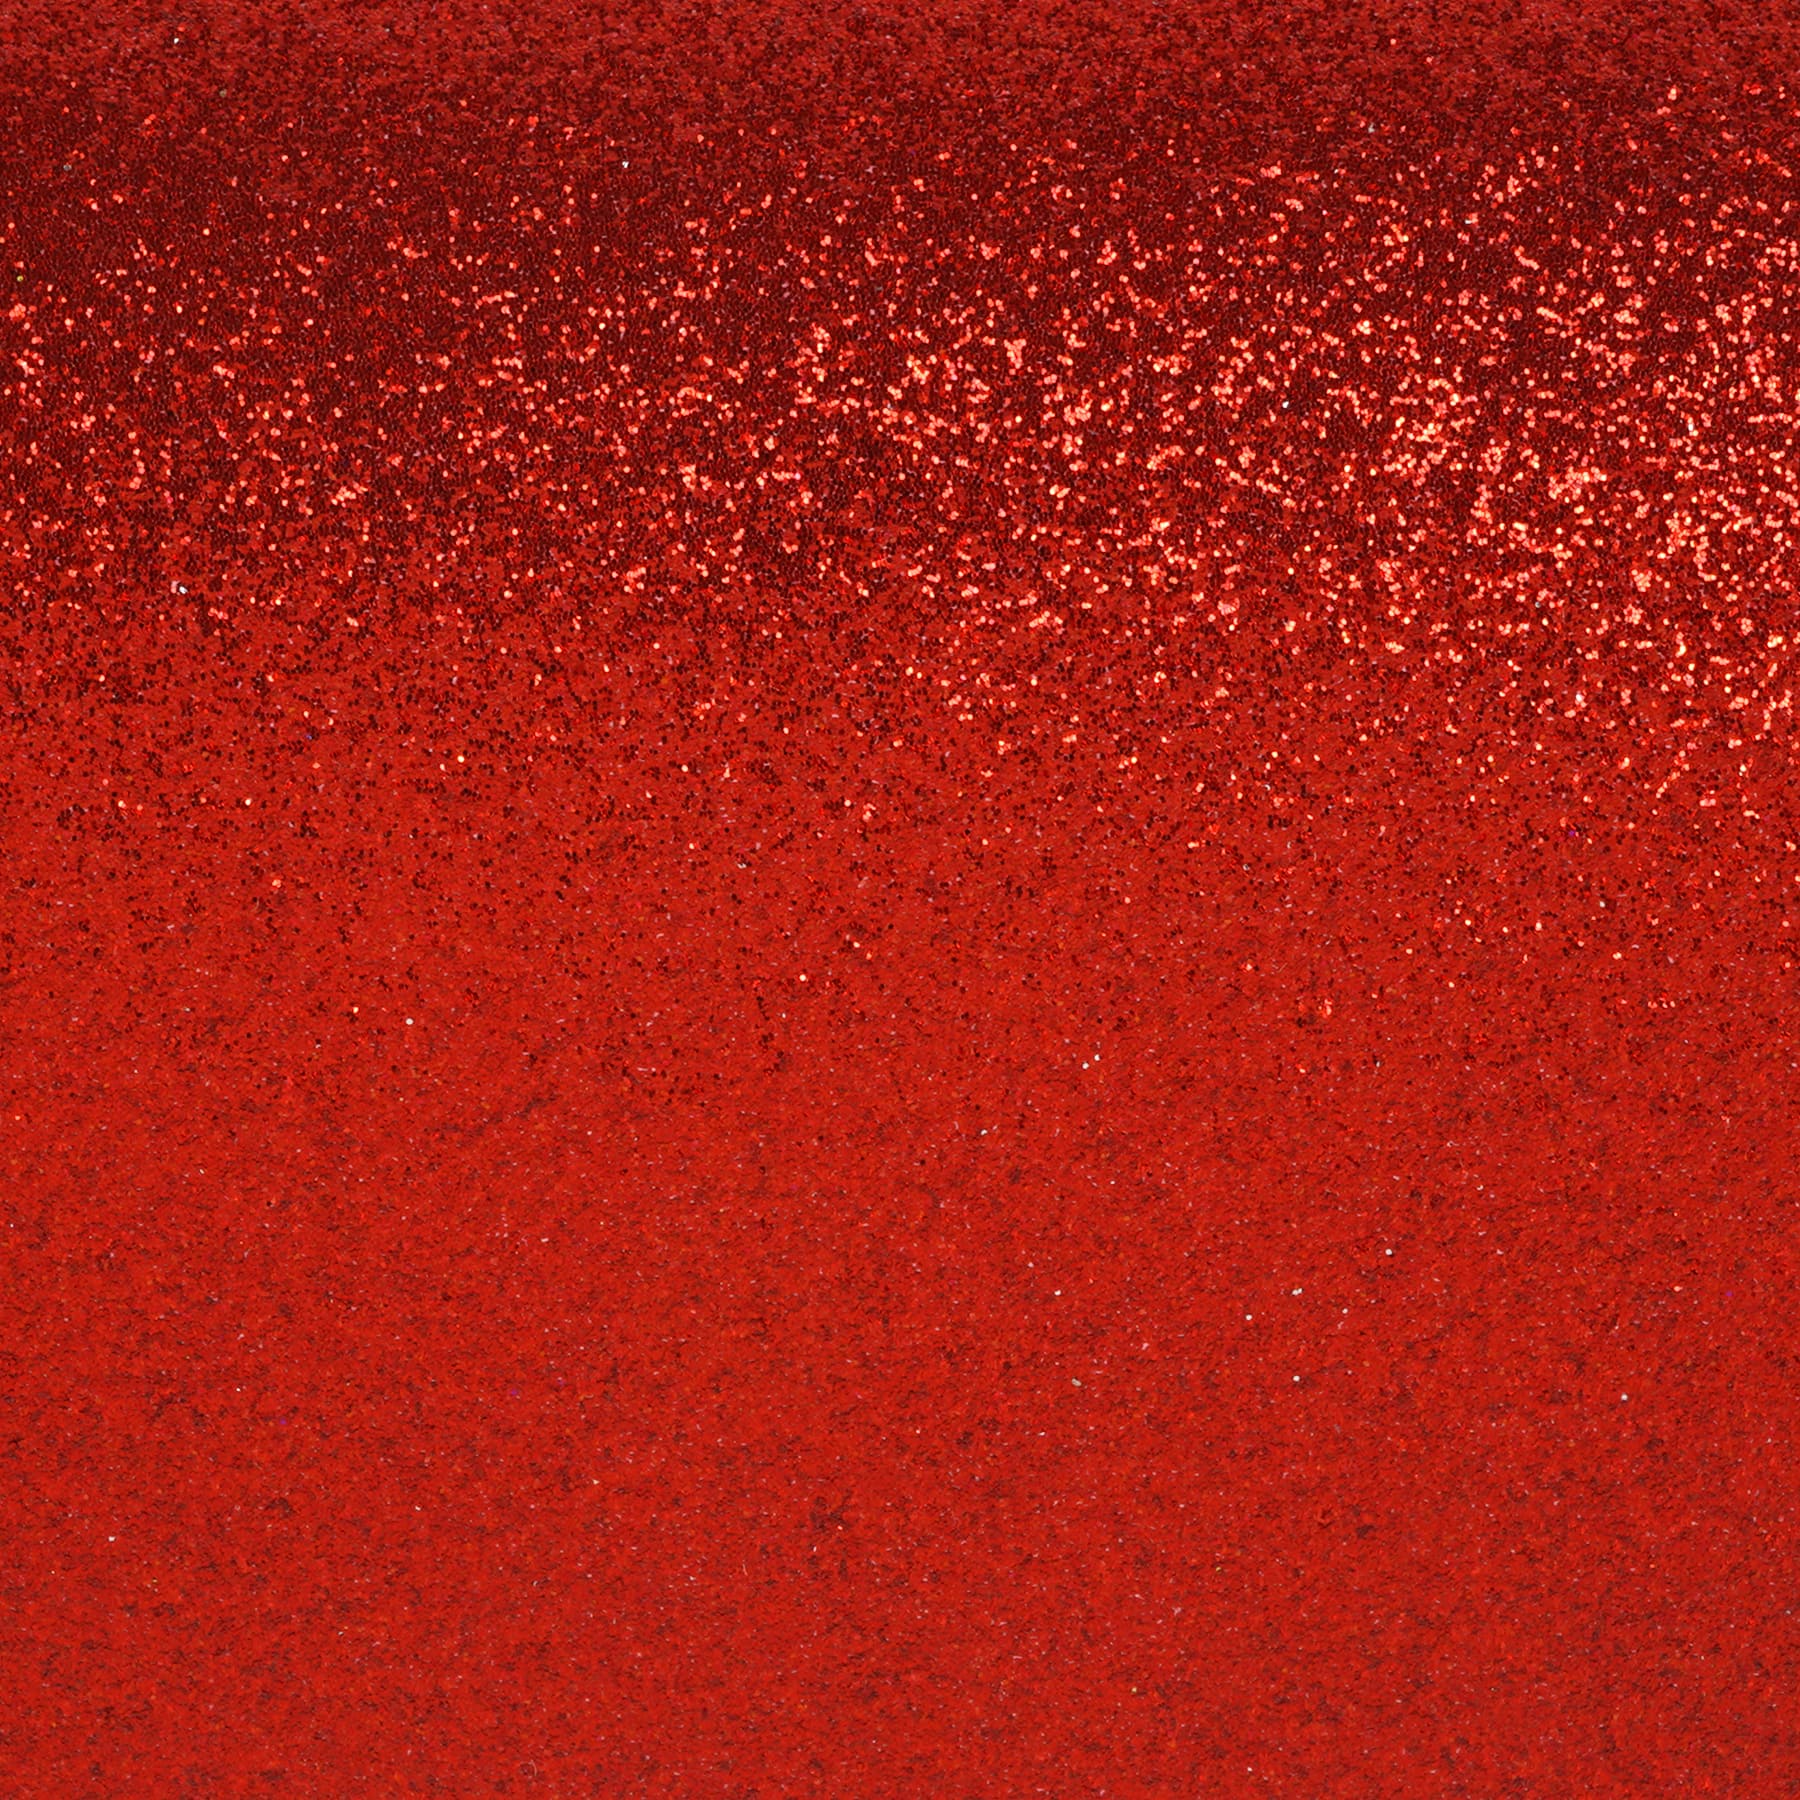 12 Packs: 24 Ct. (288 Total) Red Glitter 8.5 inch x 11 inch Cardstock Paper by Recollections, Size: 8.5” x 11”